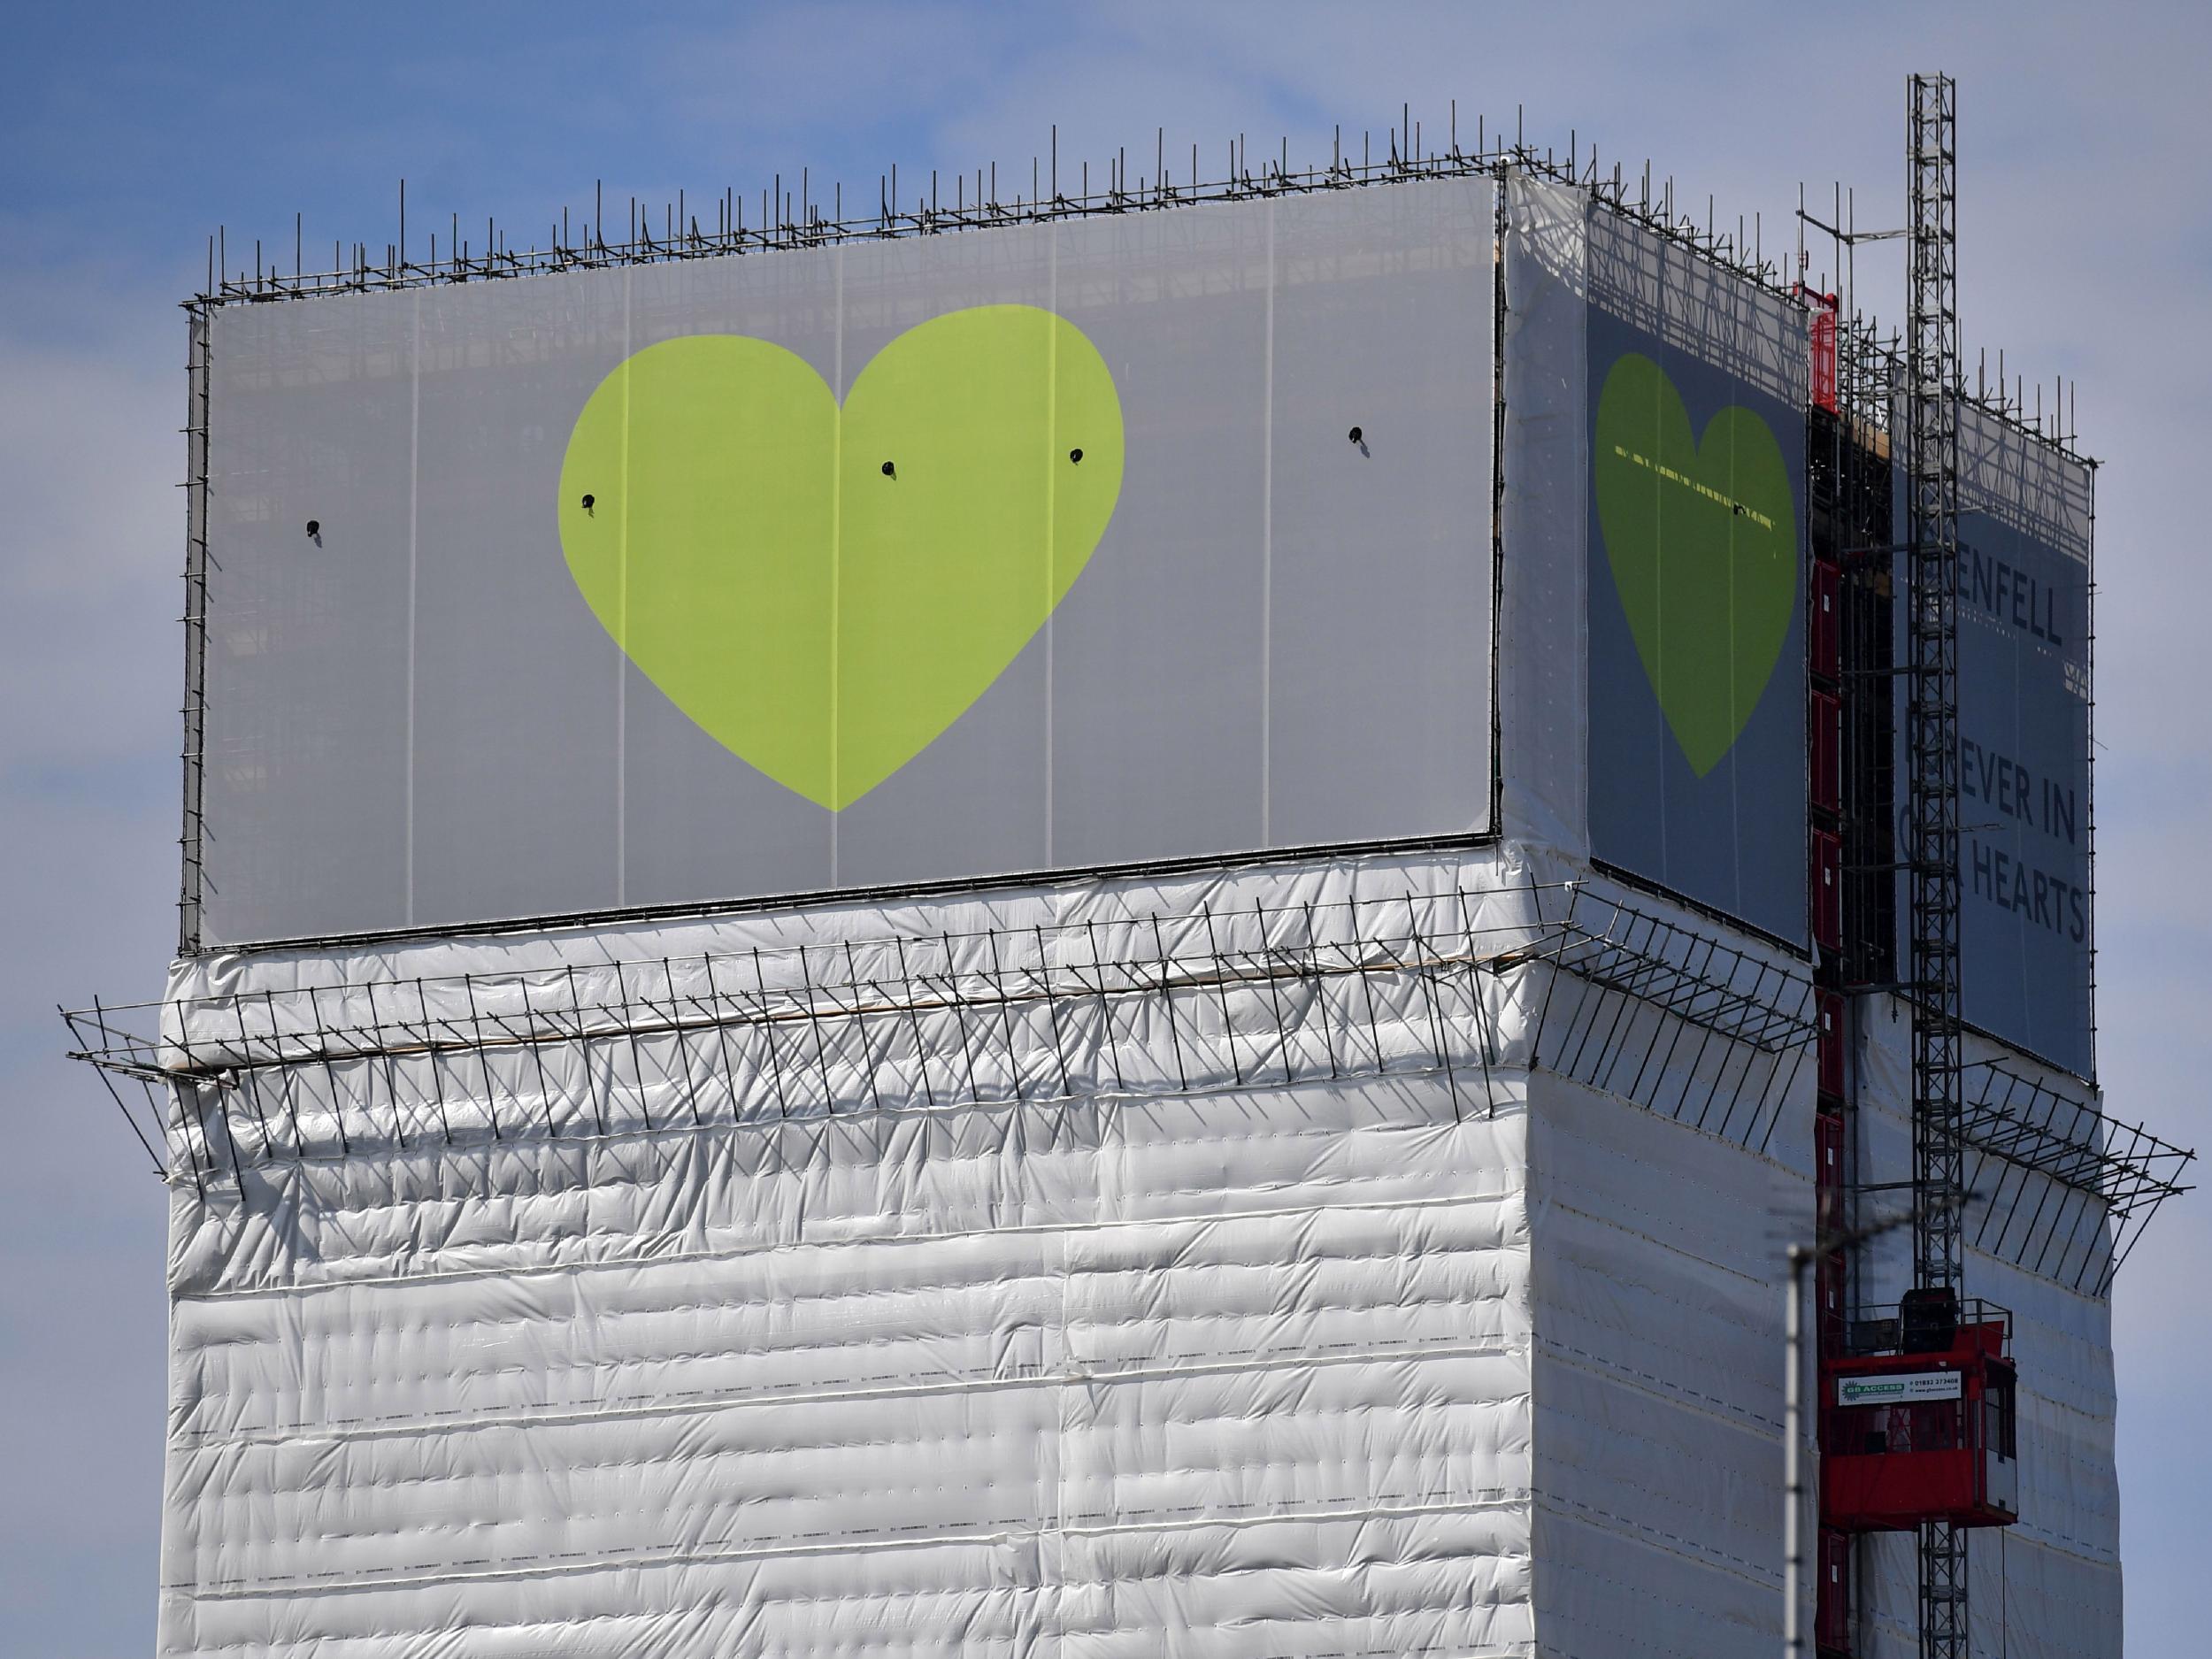 The structure is currently wrapped in white plastic sheeting, with a banner bearing a green heart hung from the top, but there are still fears the tower is causing distress